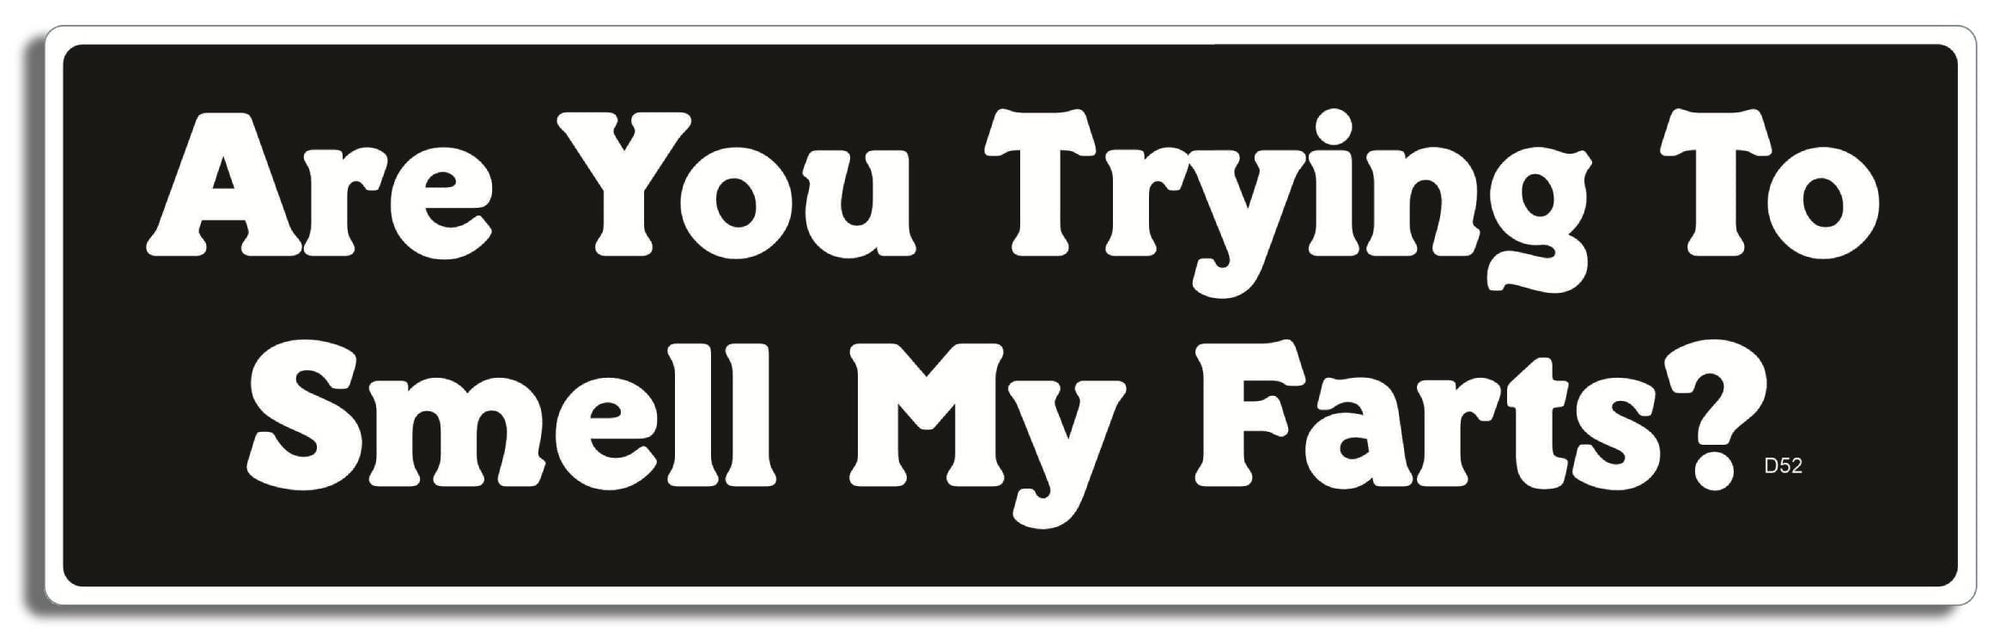 Are You Trying To Smell My Farts? -  3" x 10" Bumper Sticker--Car Magnet- -  Decal Bumper Sticker-funny Bumper Sticker Car Magnet Are You Trying To Smell My Farts?-  Decal for cars funny bumper sticker, funny quote, funny quotes